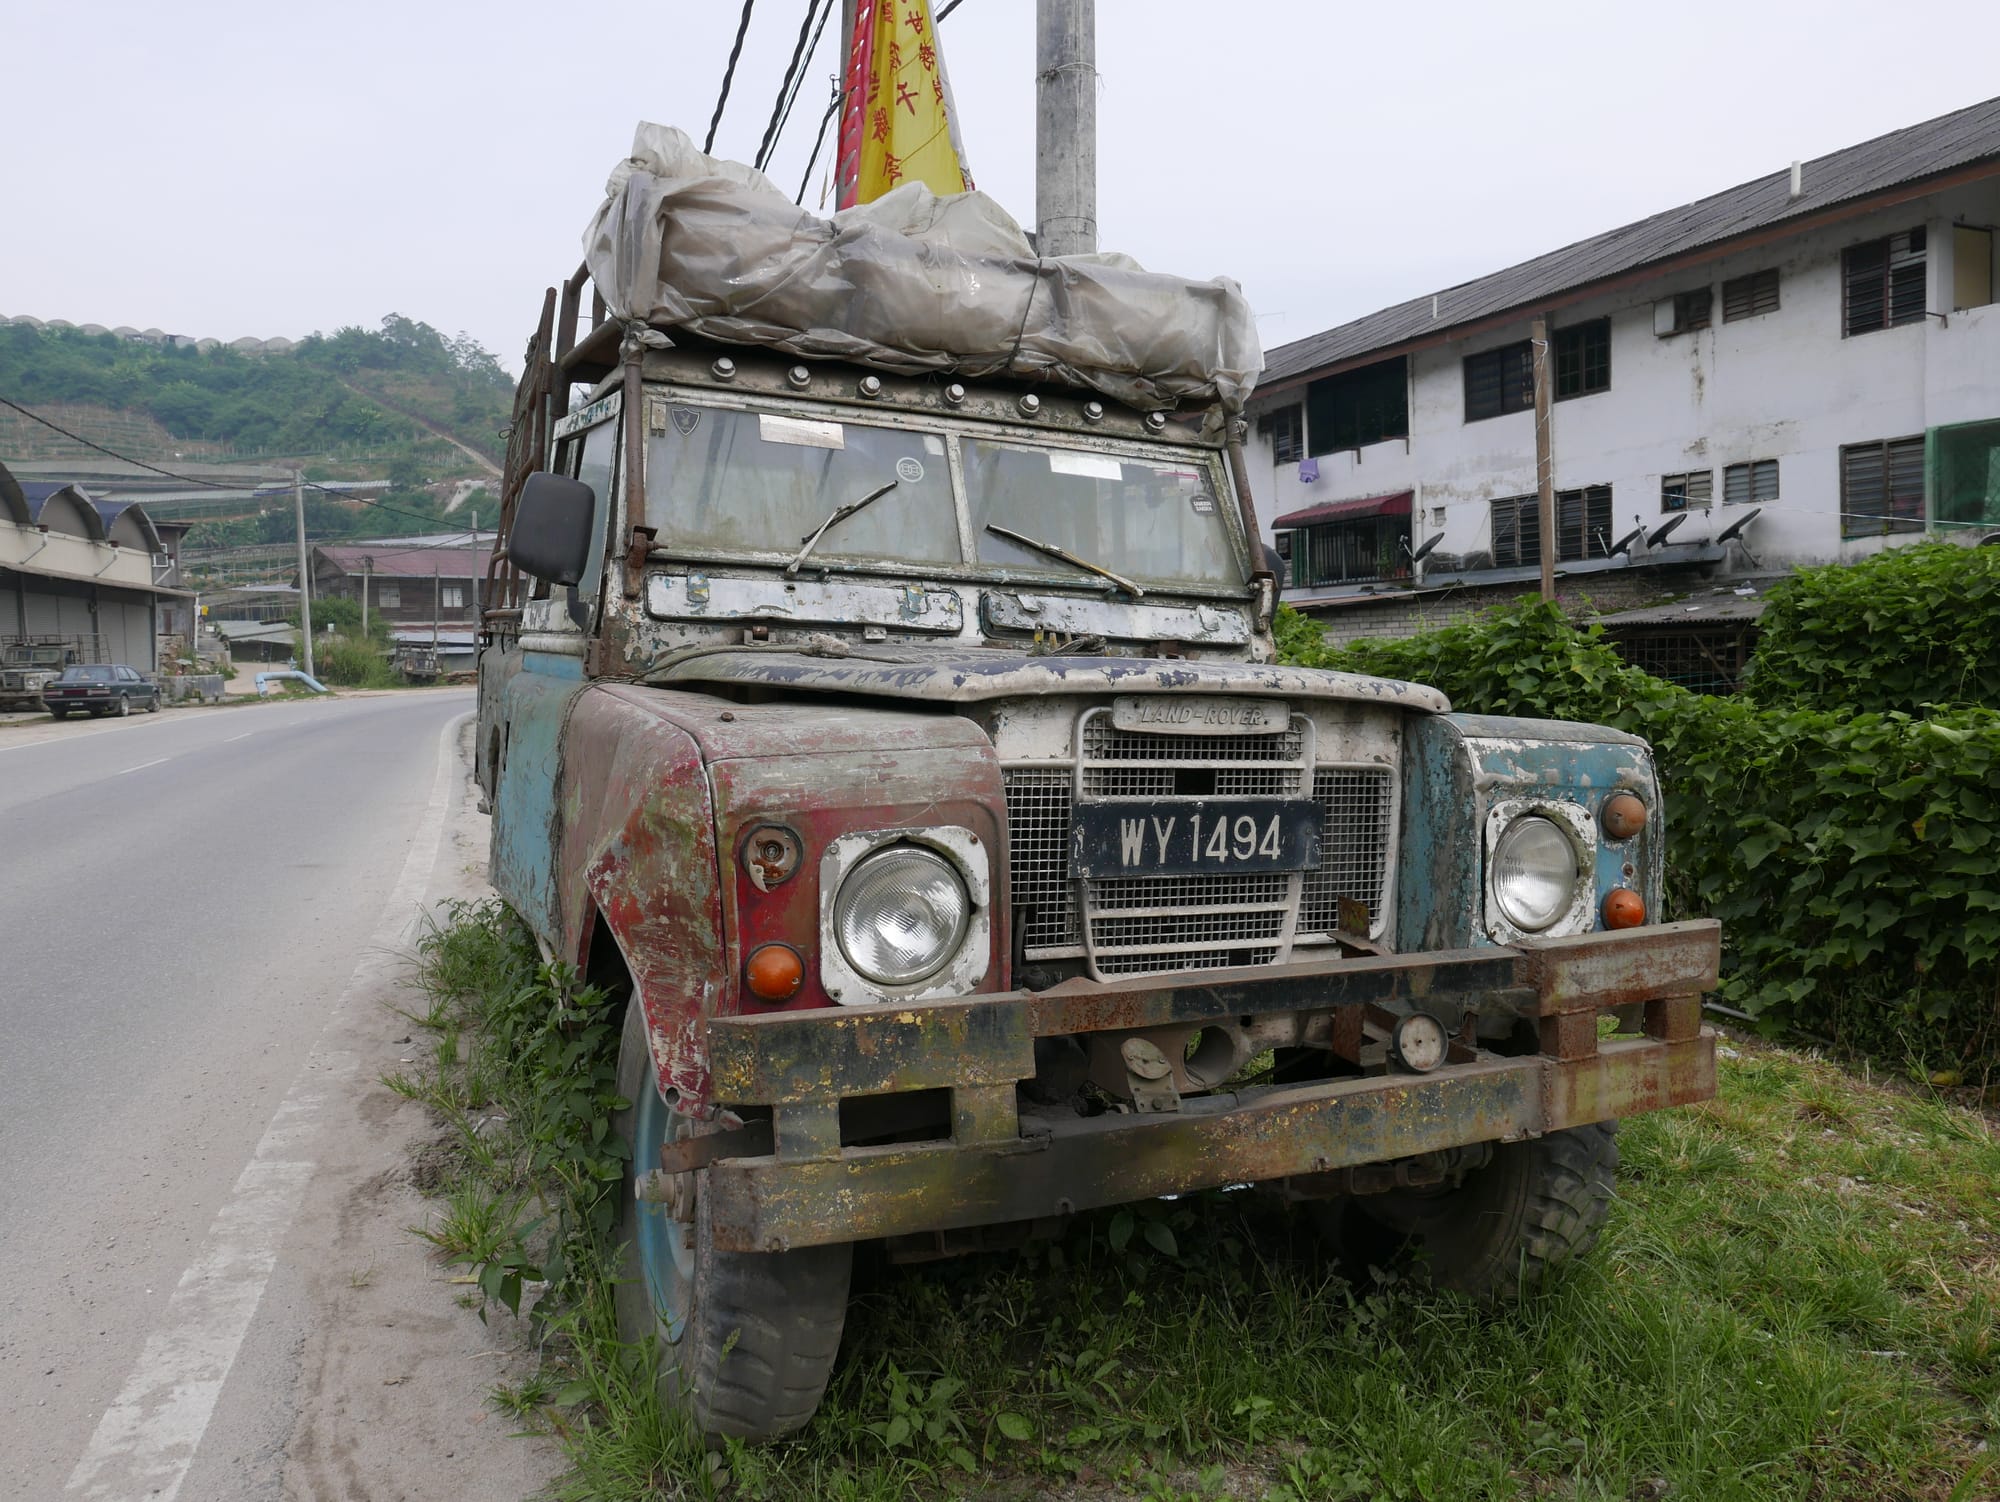 Photo by Author — Land Rovers in the Cameron Highlands, Malaysia